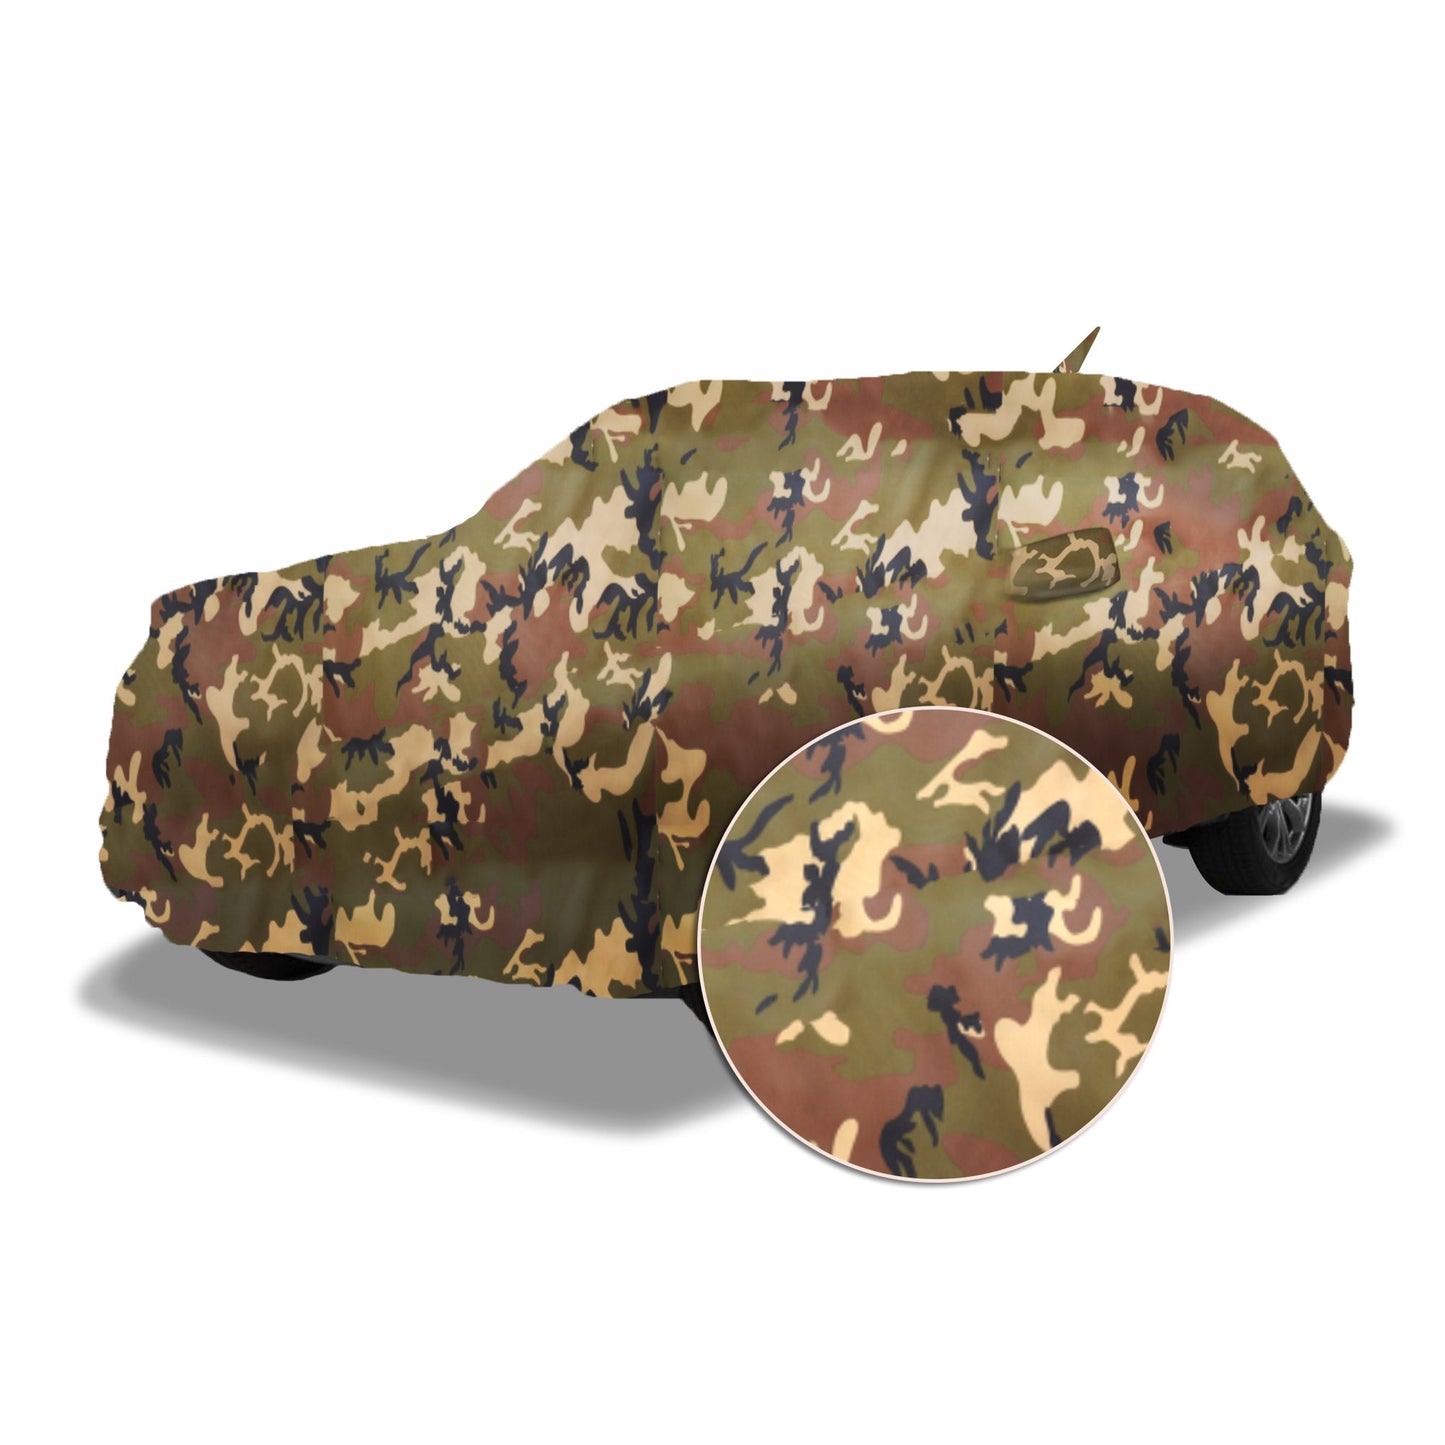 Ascot Hyundai i20 Car Body Cover 2020-2023 Model Extra Strong & Dust Proof Jungle Military Car Cover with UV Proof & Water-Resistant Coating